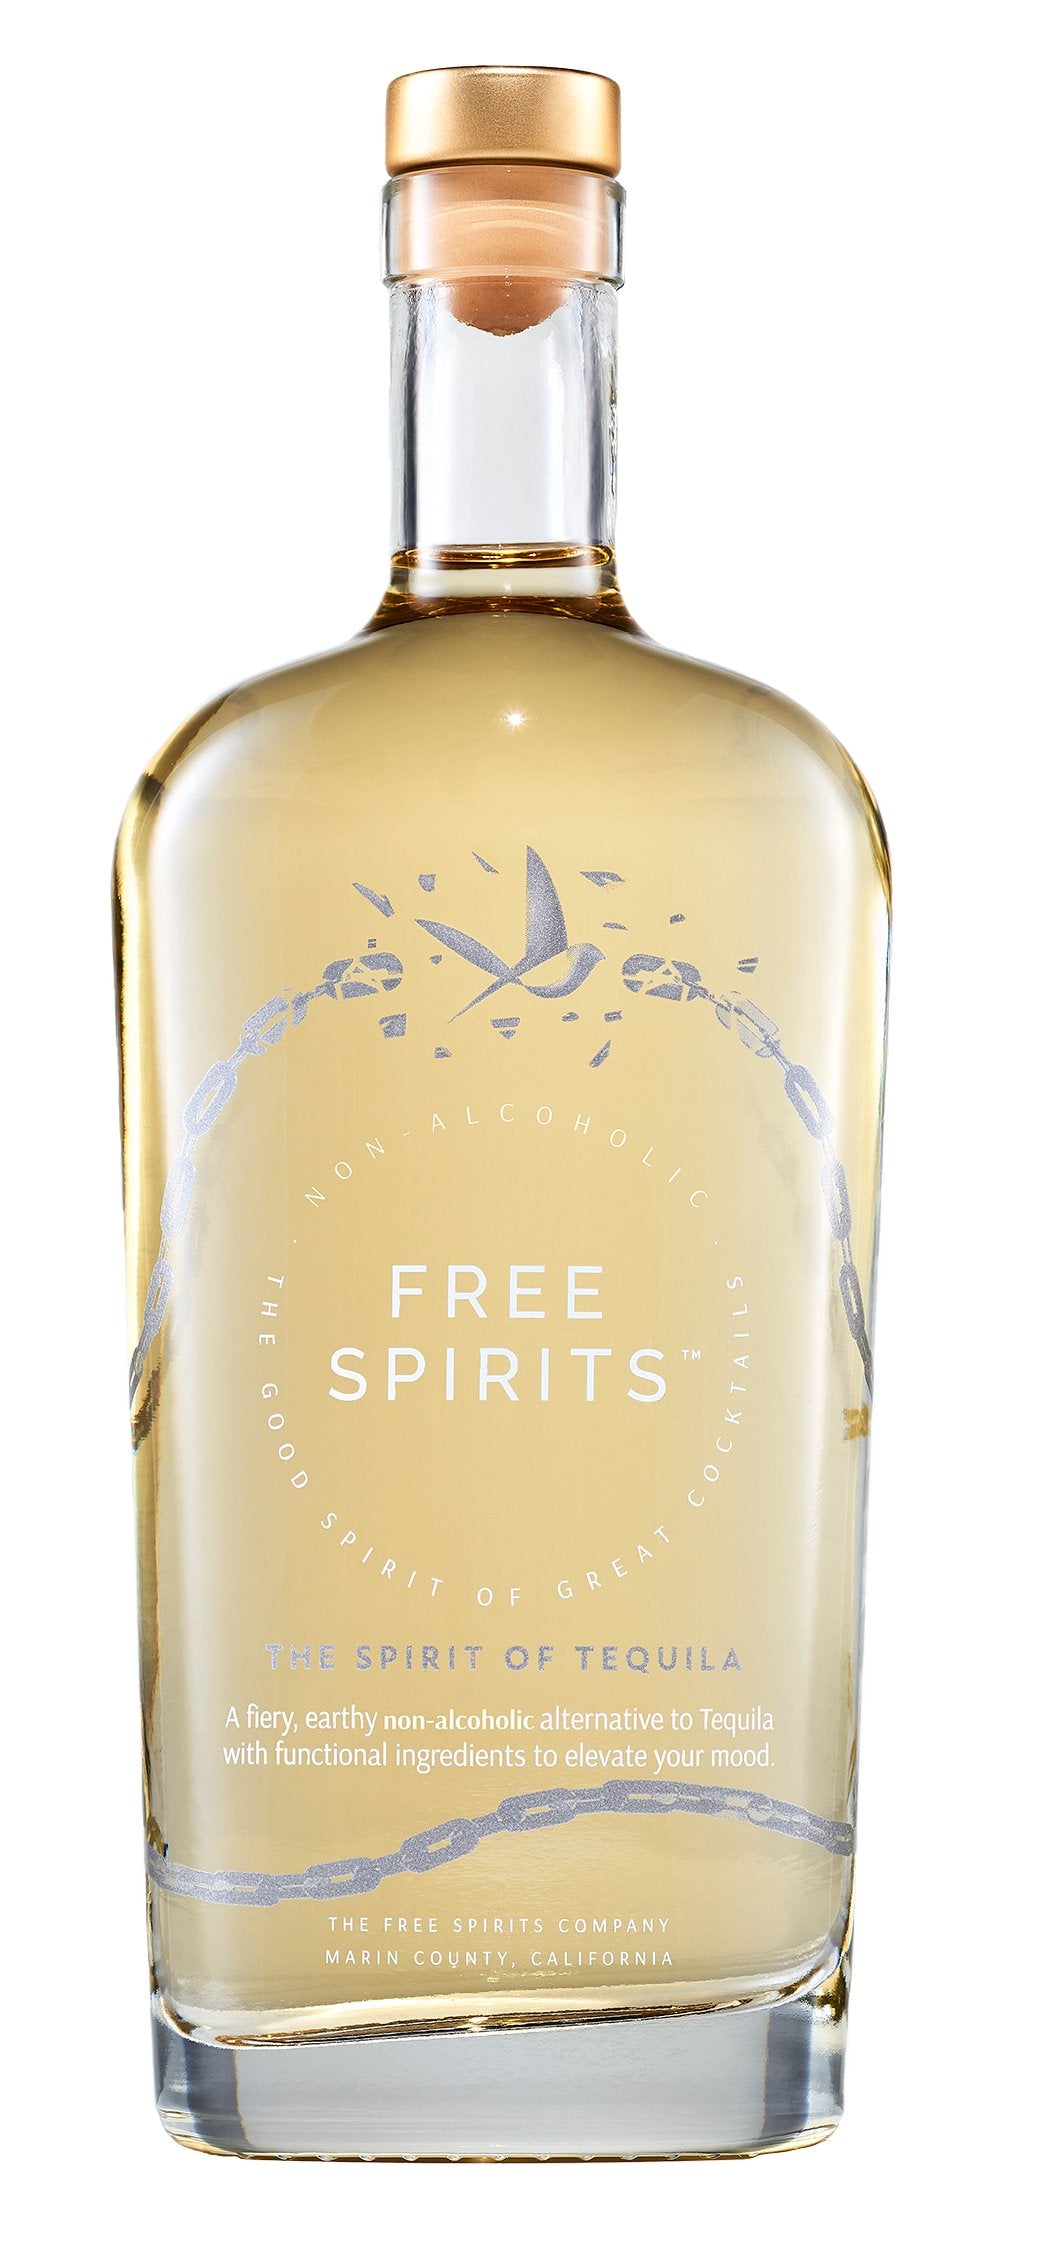 The Spirit of Tequila by FREE SPIRITS